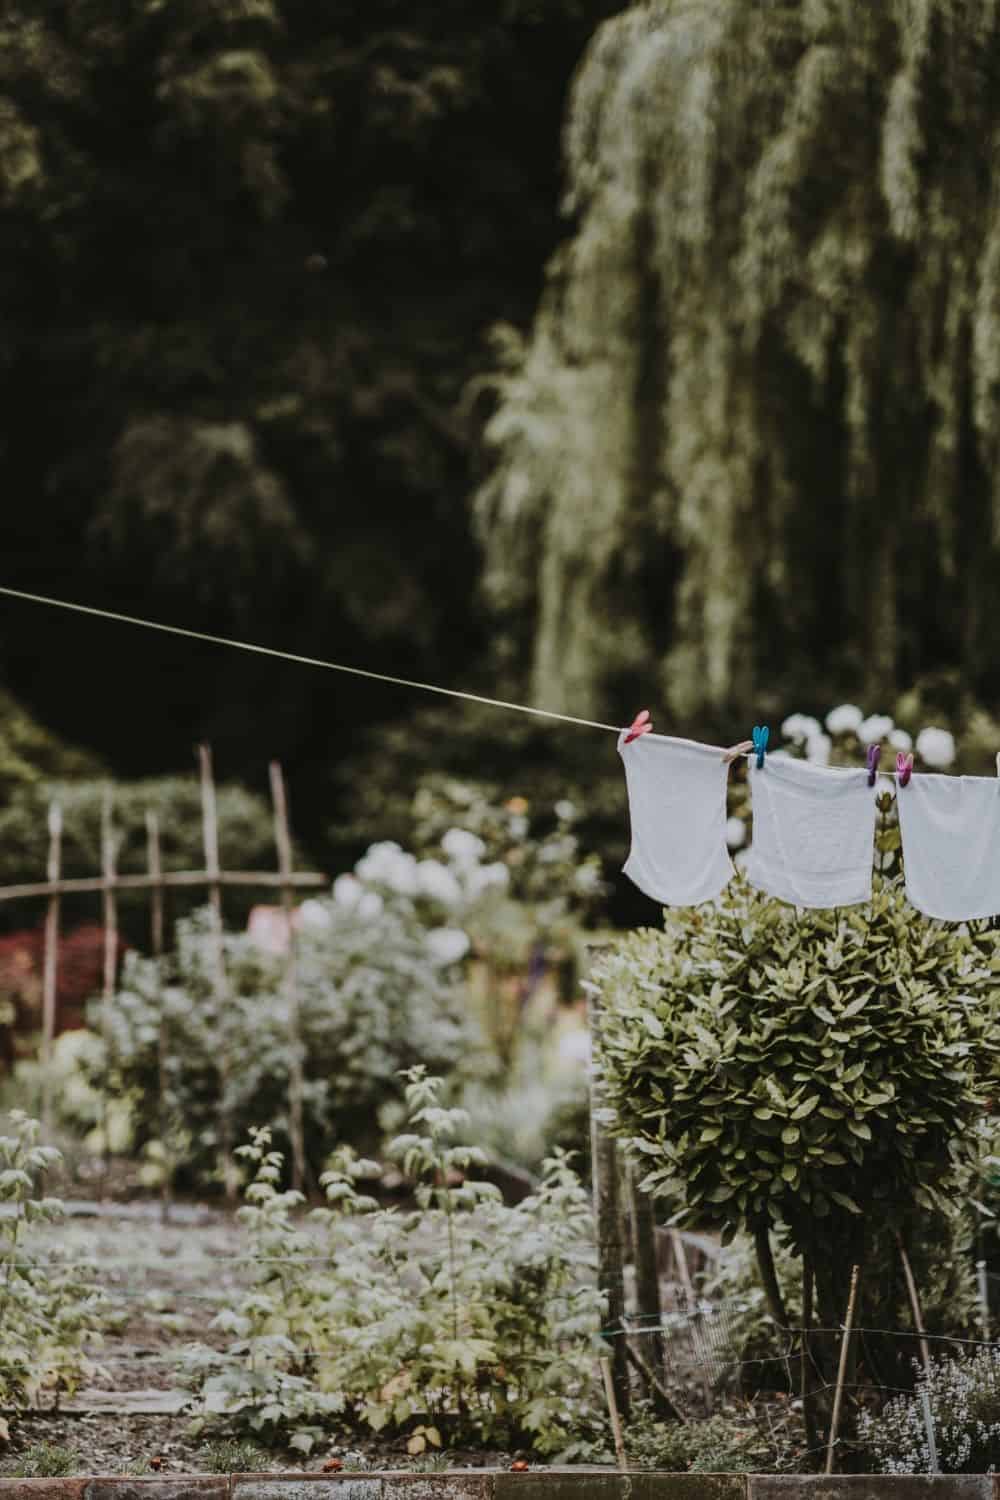 Wondering how to wash cloth nappies without making a mess of it? You’re not alone. It’s a common stumbling block for parents facing the “disposable vs cloth” diaper dilemma. Image by Annie Spratt via Unsplash #howtowashclothnappies #howtowashclothdiapers #sustainablejungle